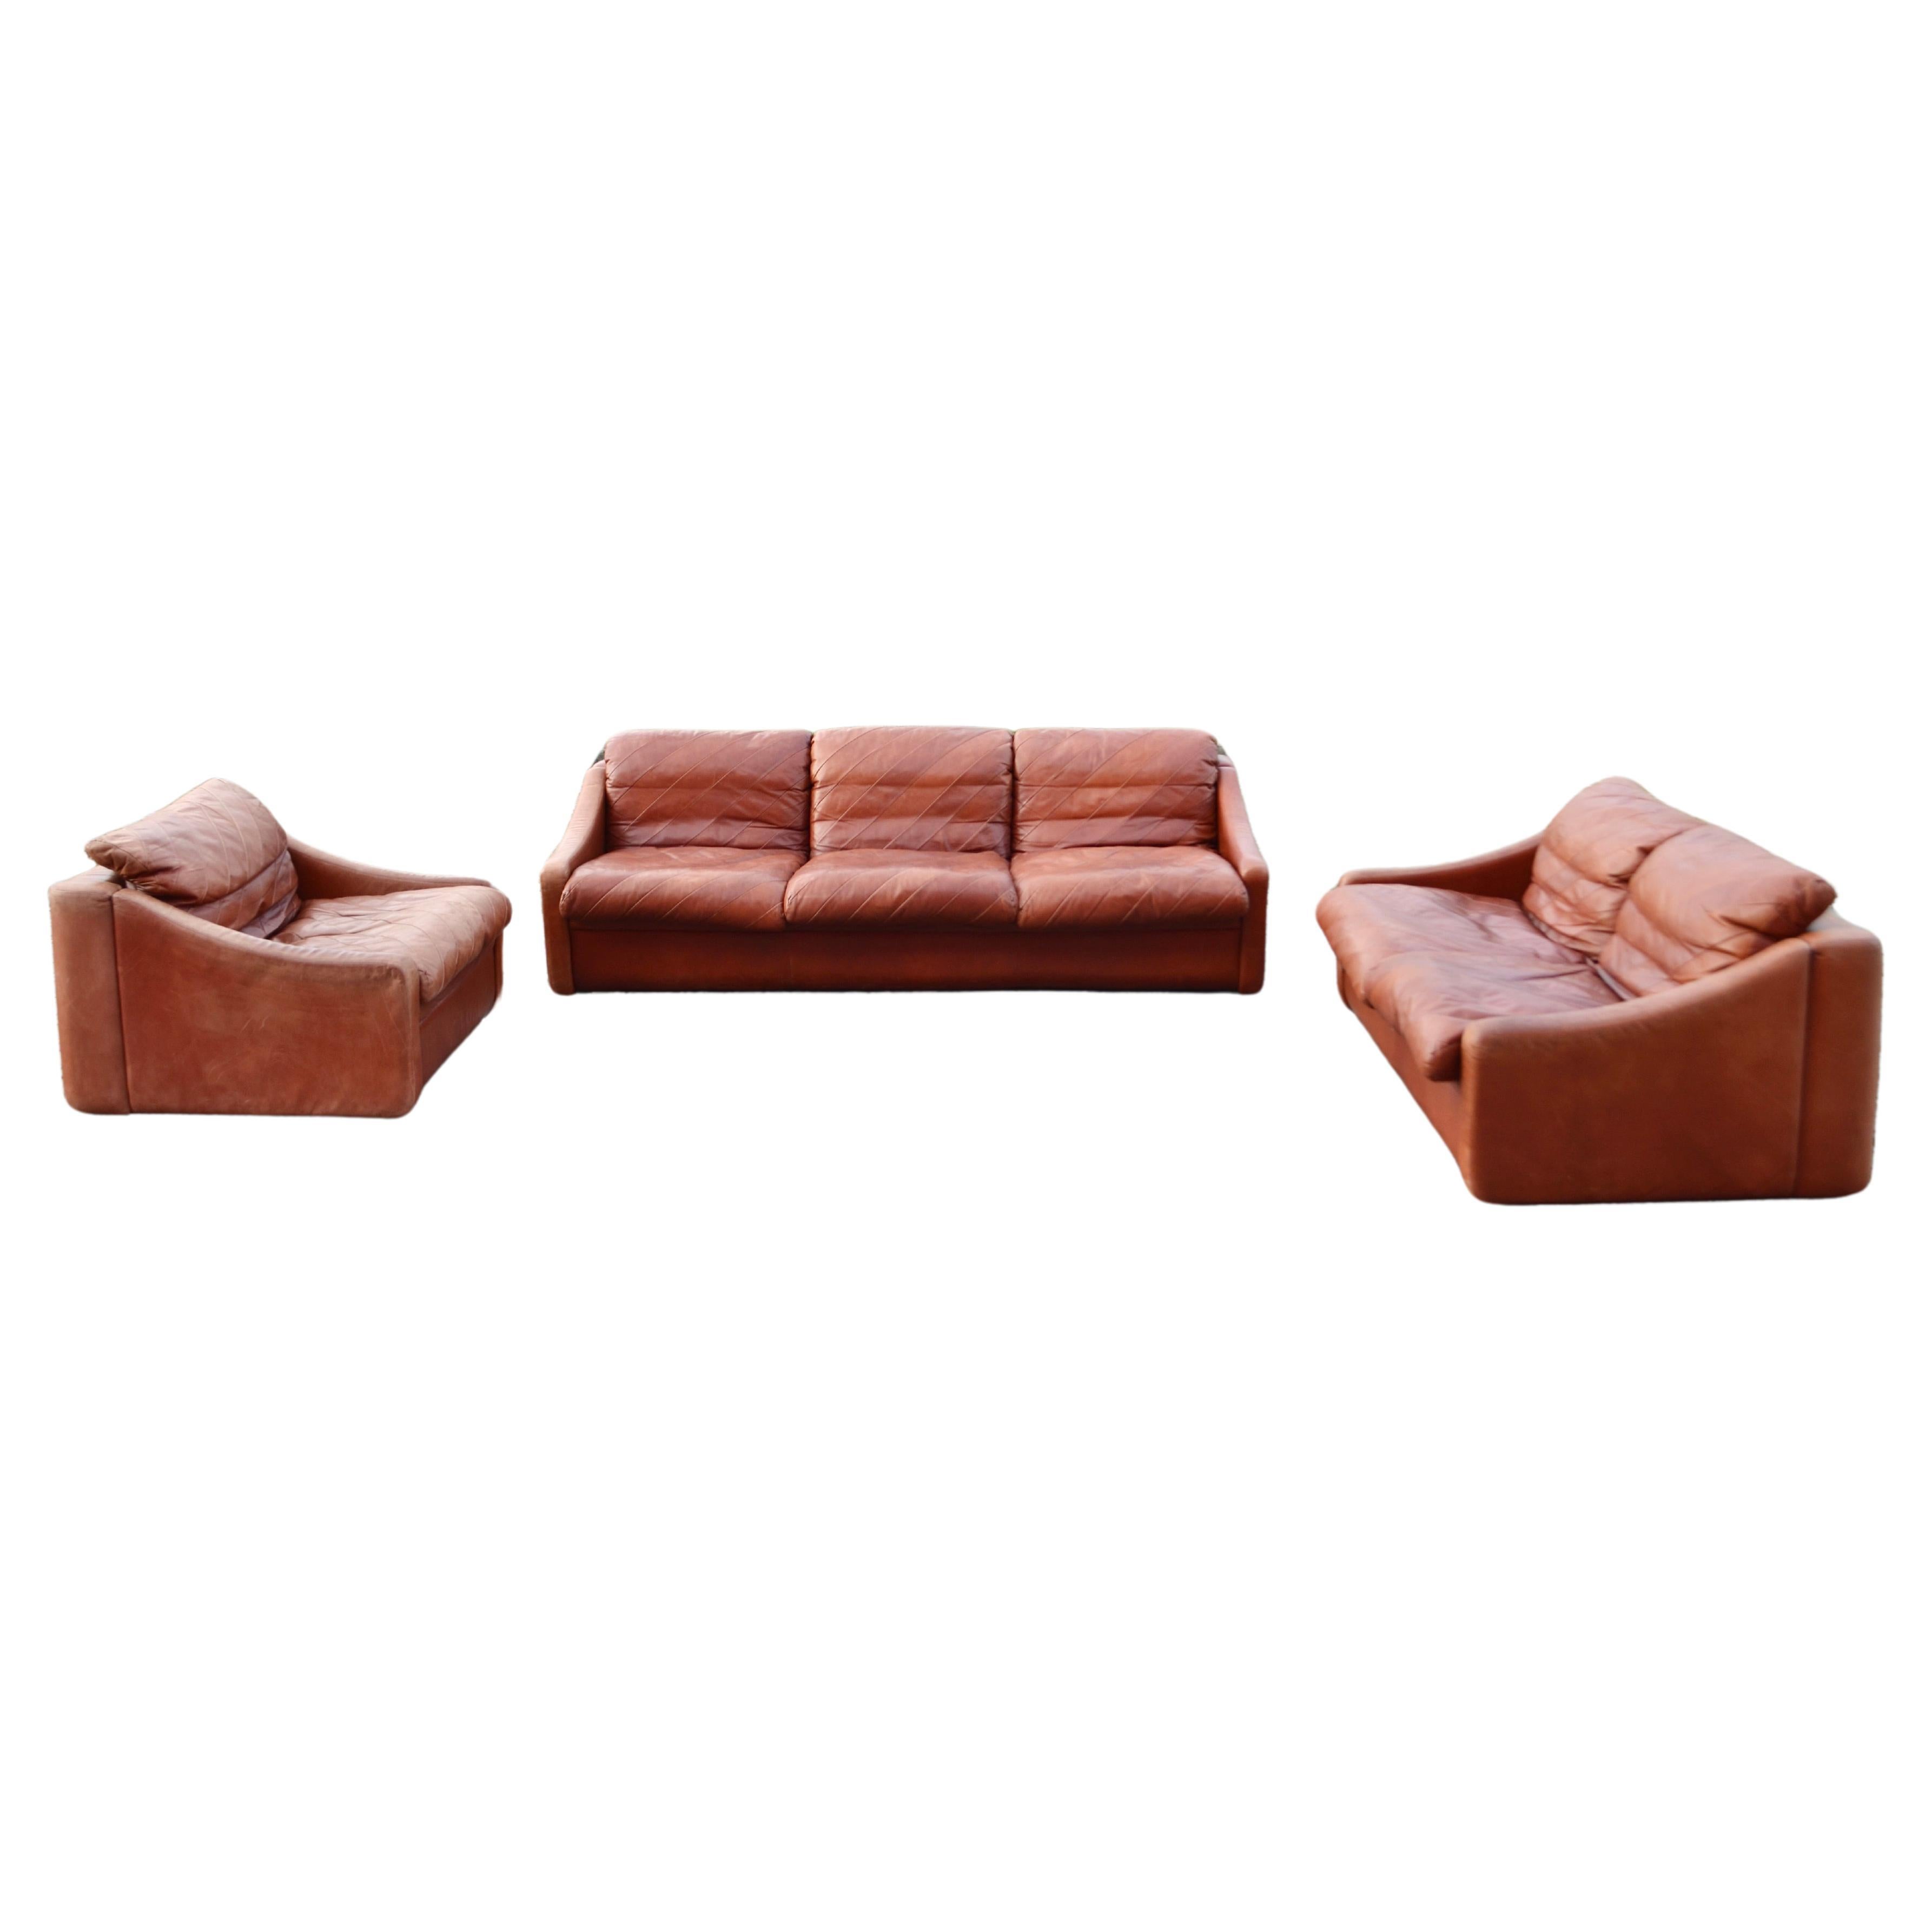 Rolf Benz Vintage Oxred Leather Living room Sofa Ensemble, Germany, 1970